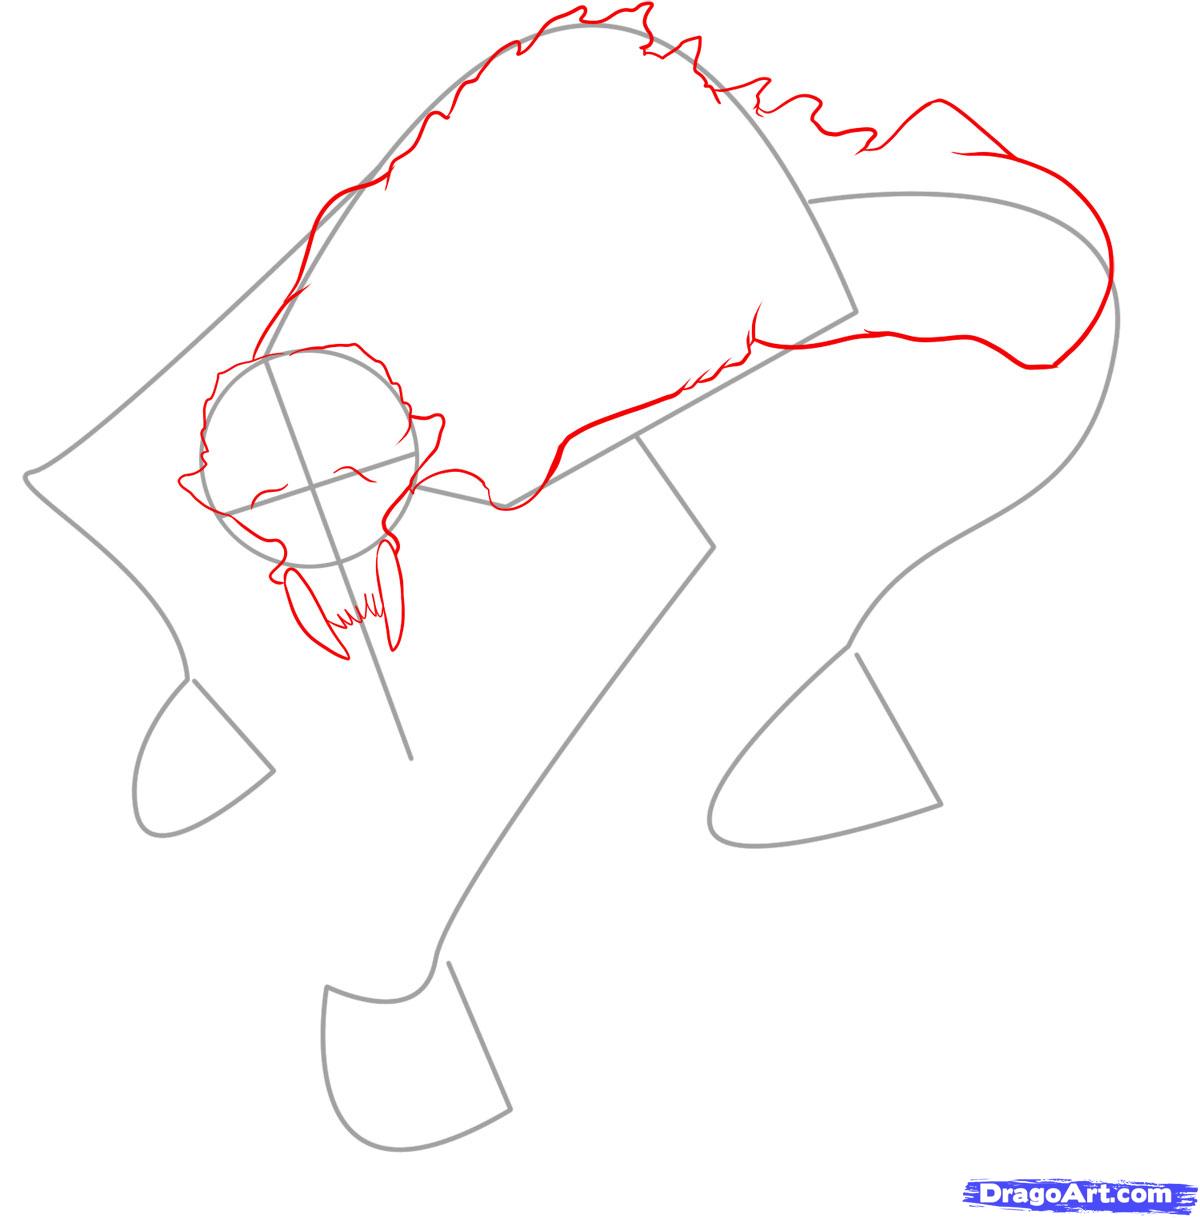 how-to-draw-a-beast-step-2_1_000000041509_5